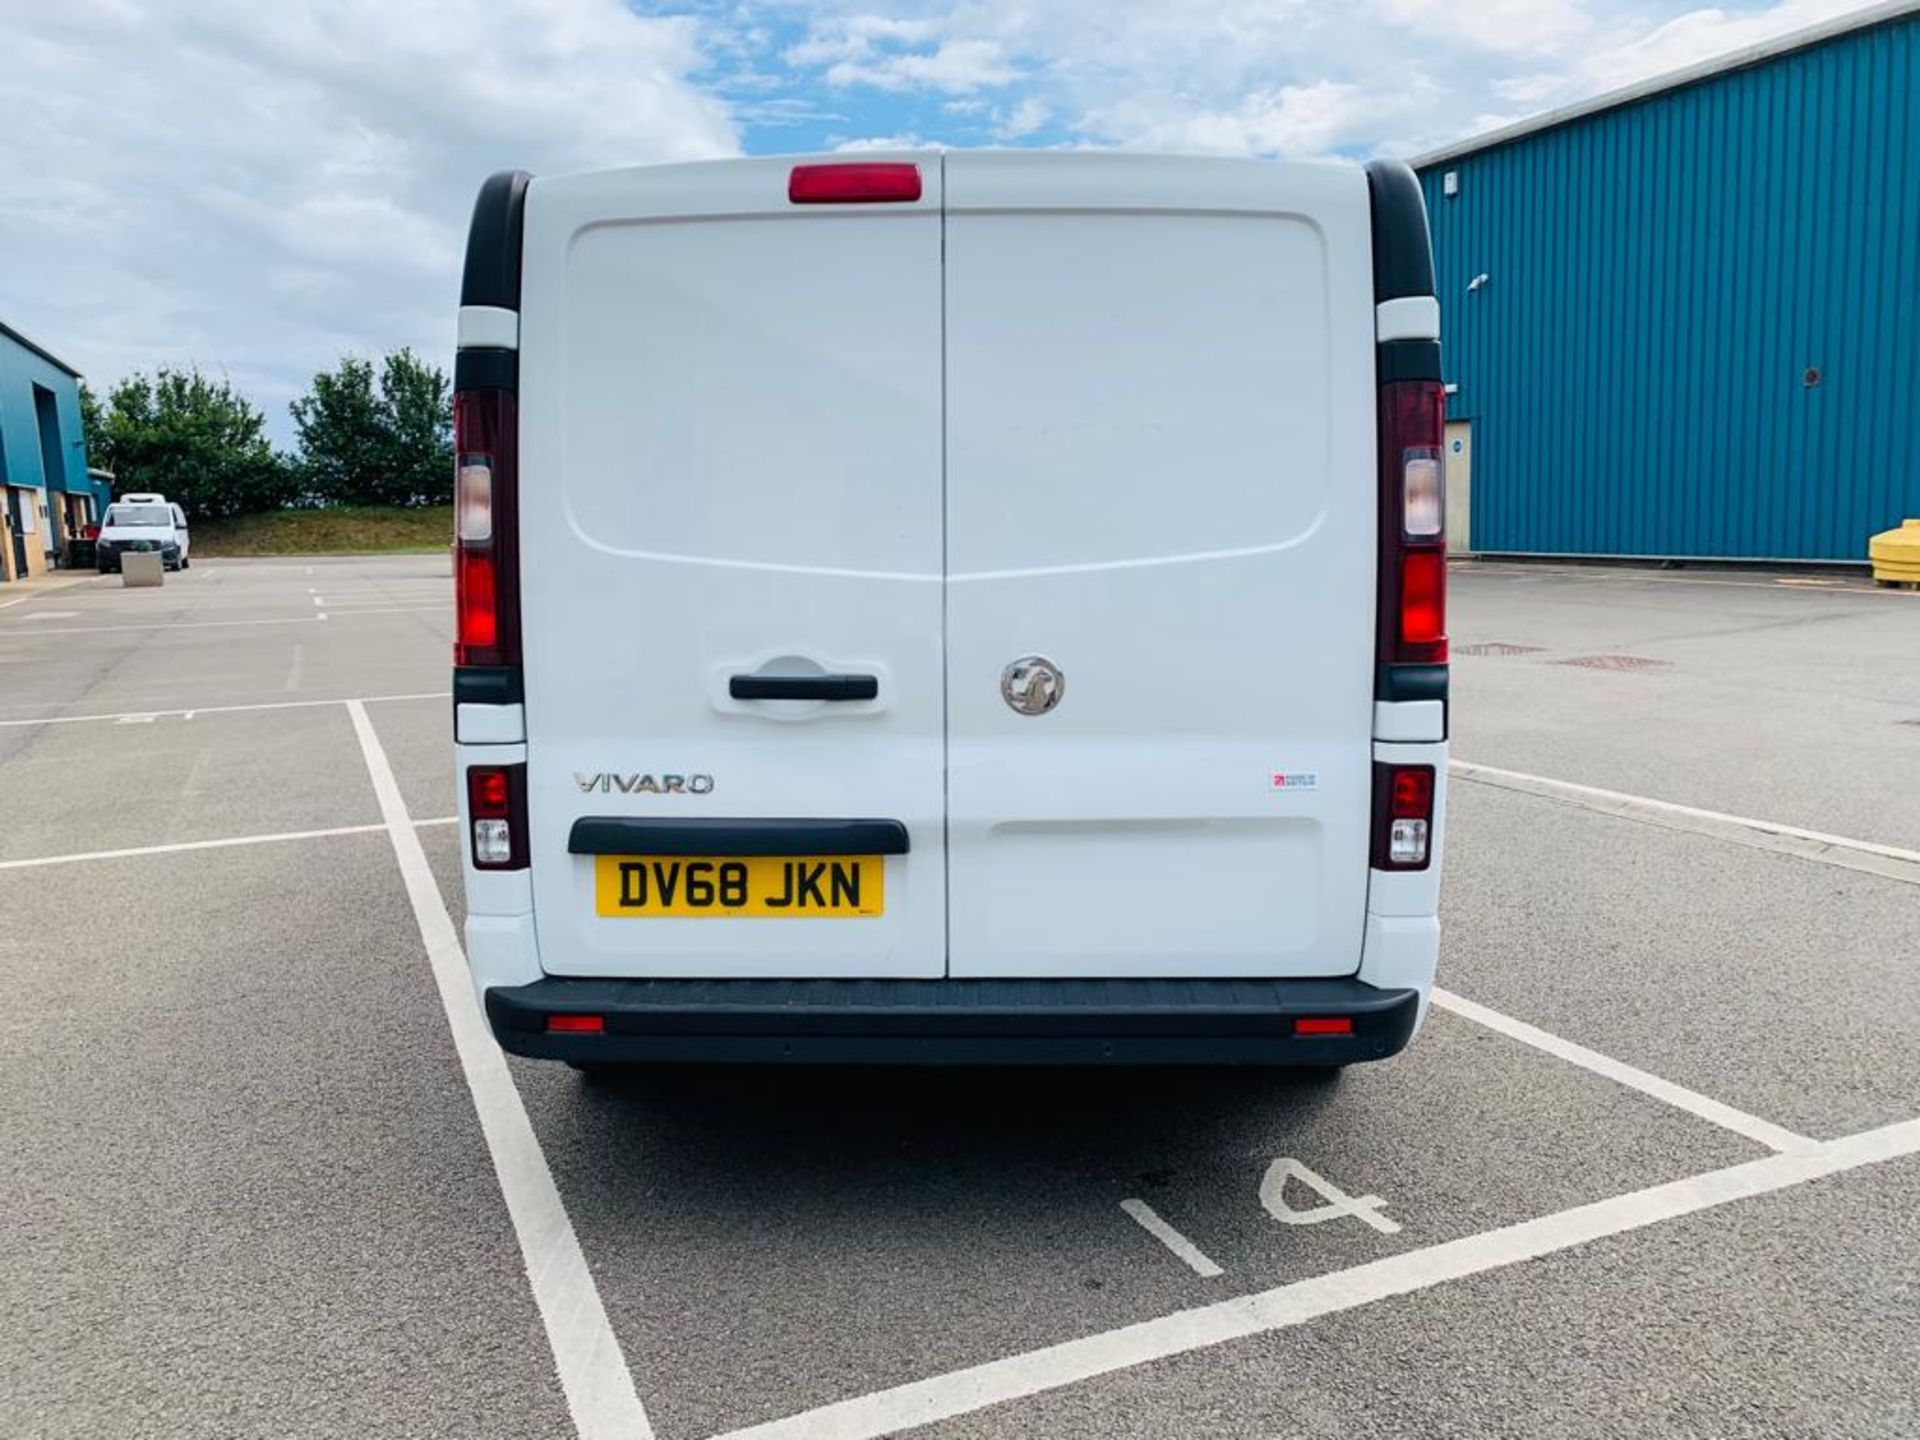 Vauxhall Vivaro 2900 1.6 CDTI Sportive - 2019 Model - 6 Speed - Air Con - Cruise - ONLY 25K Miles - Image 4 of 24